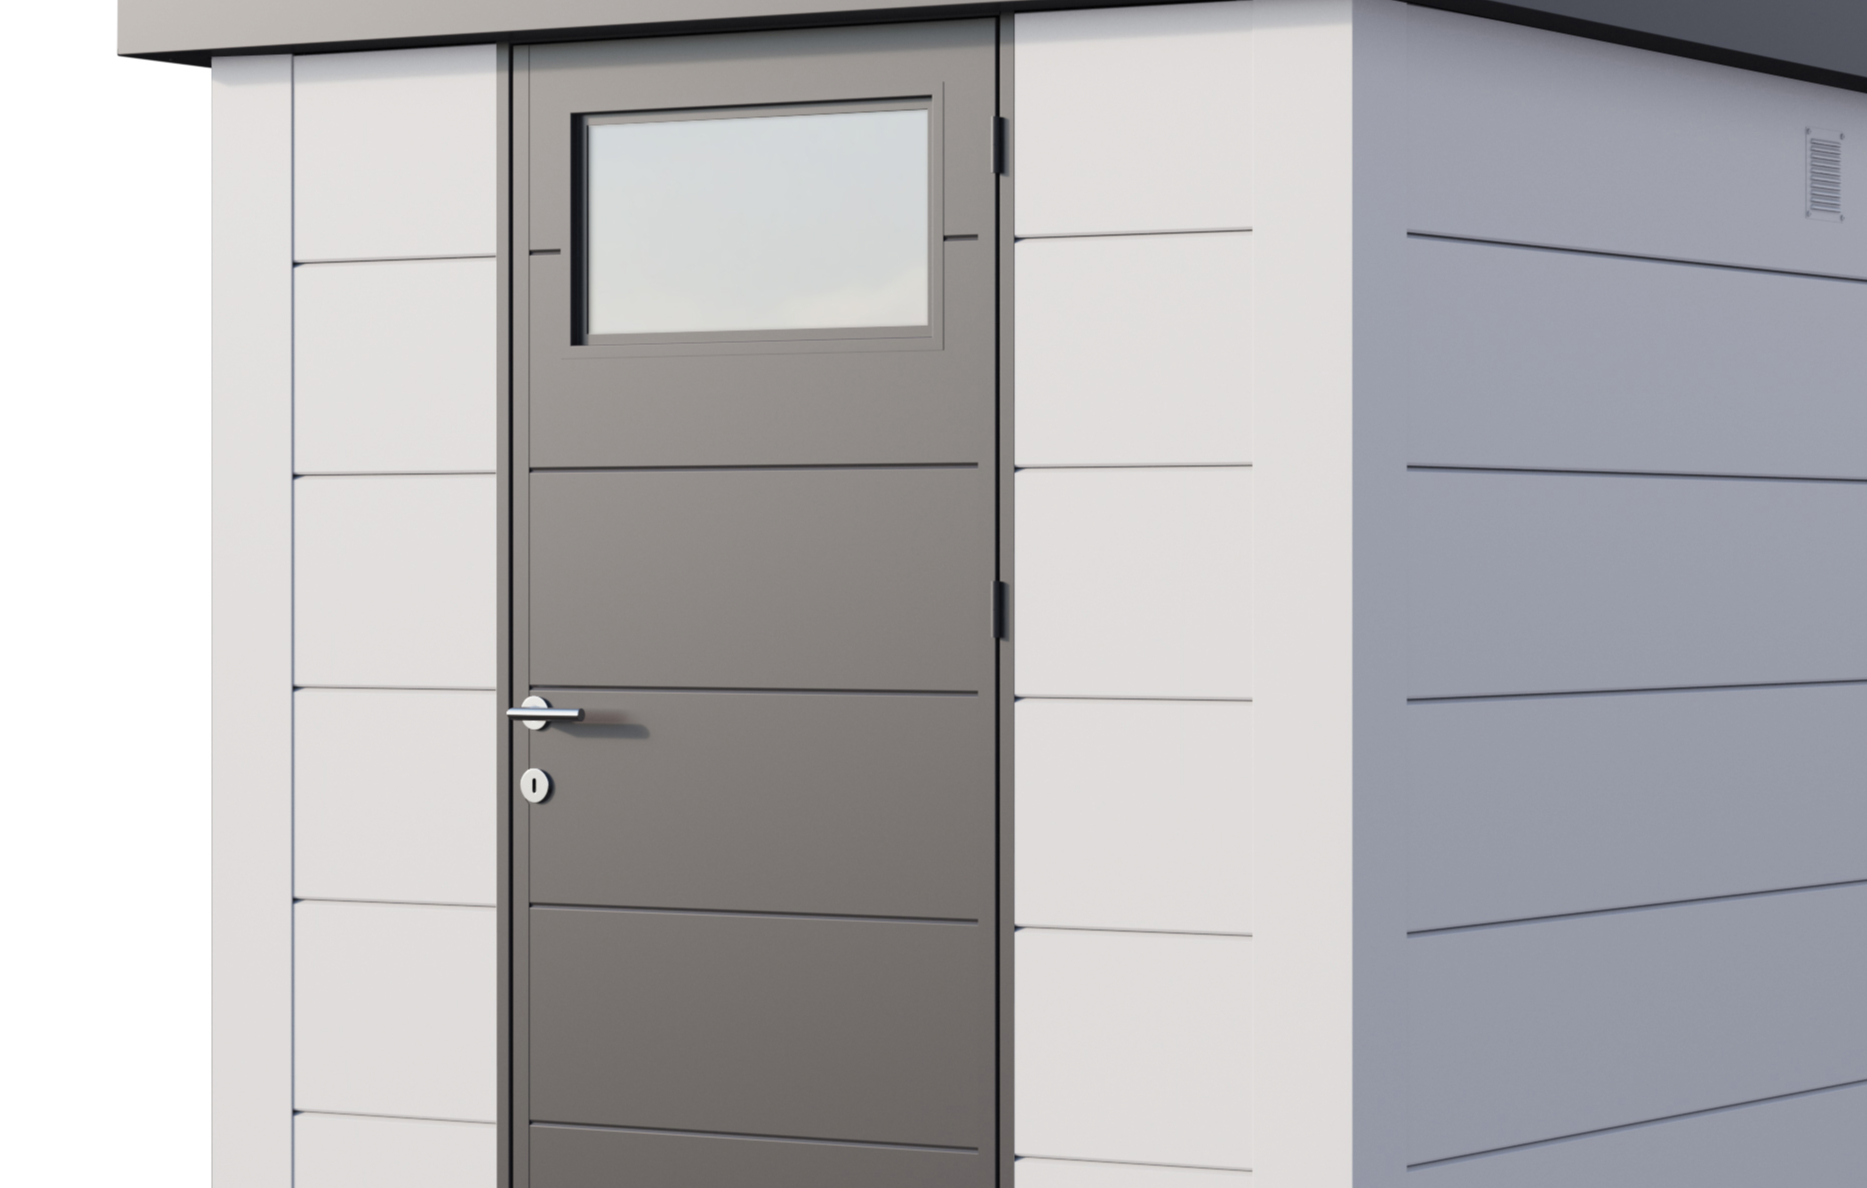 The Eleganto Standard Single Door in Anthracite With The White Walls